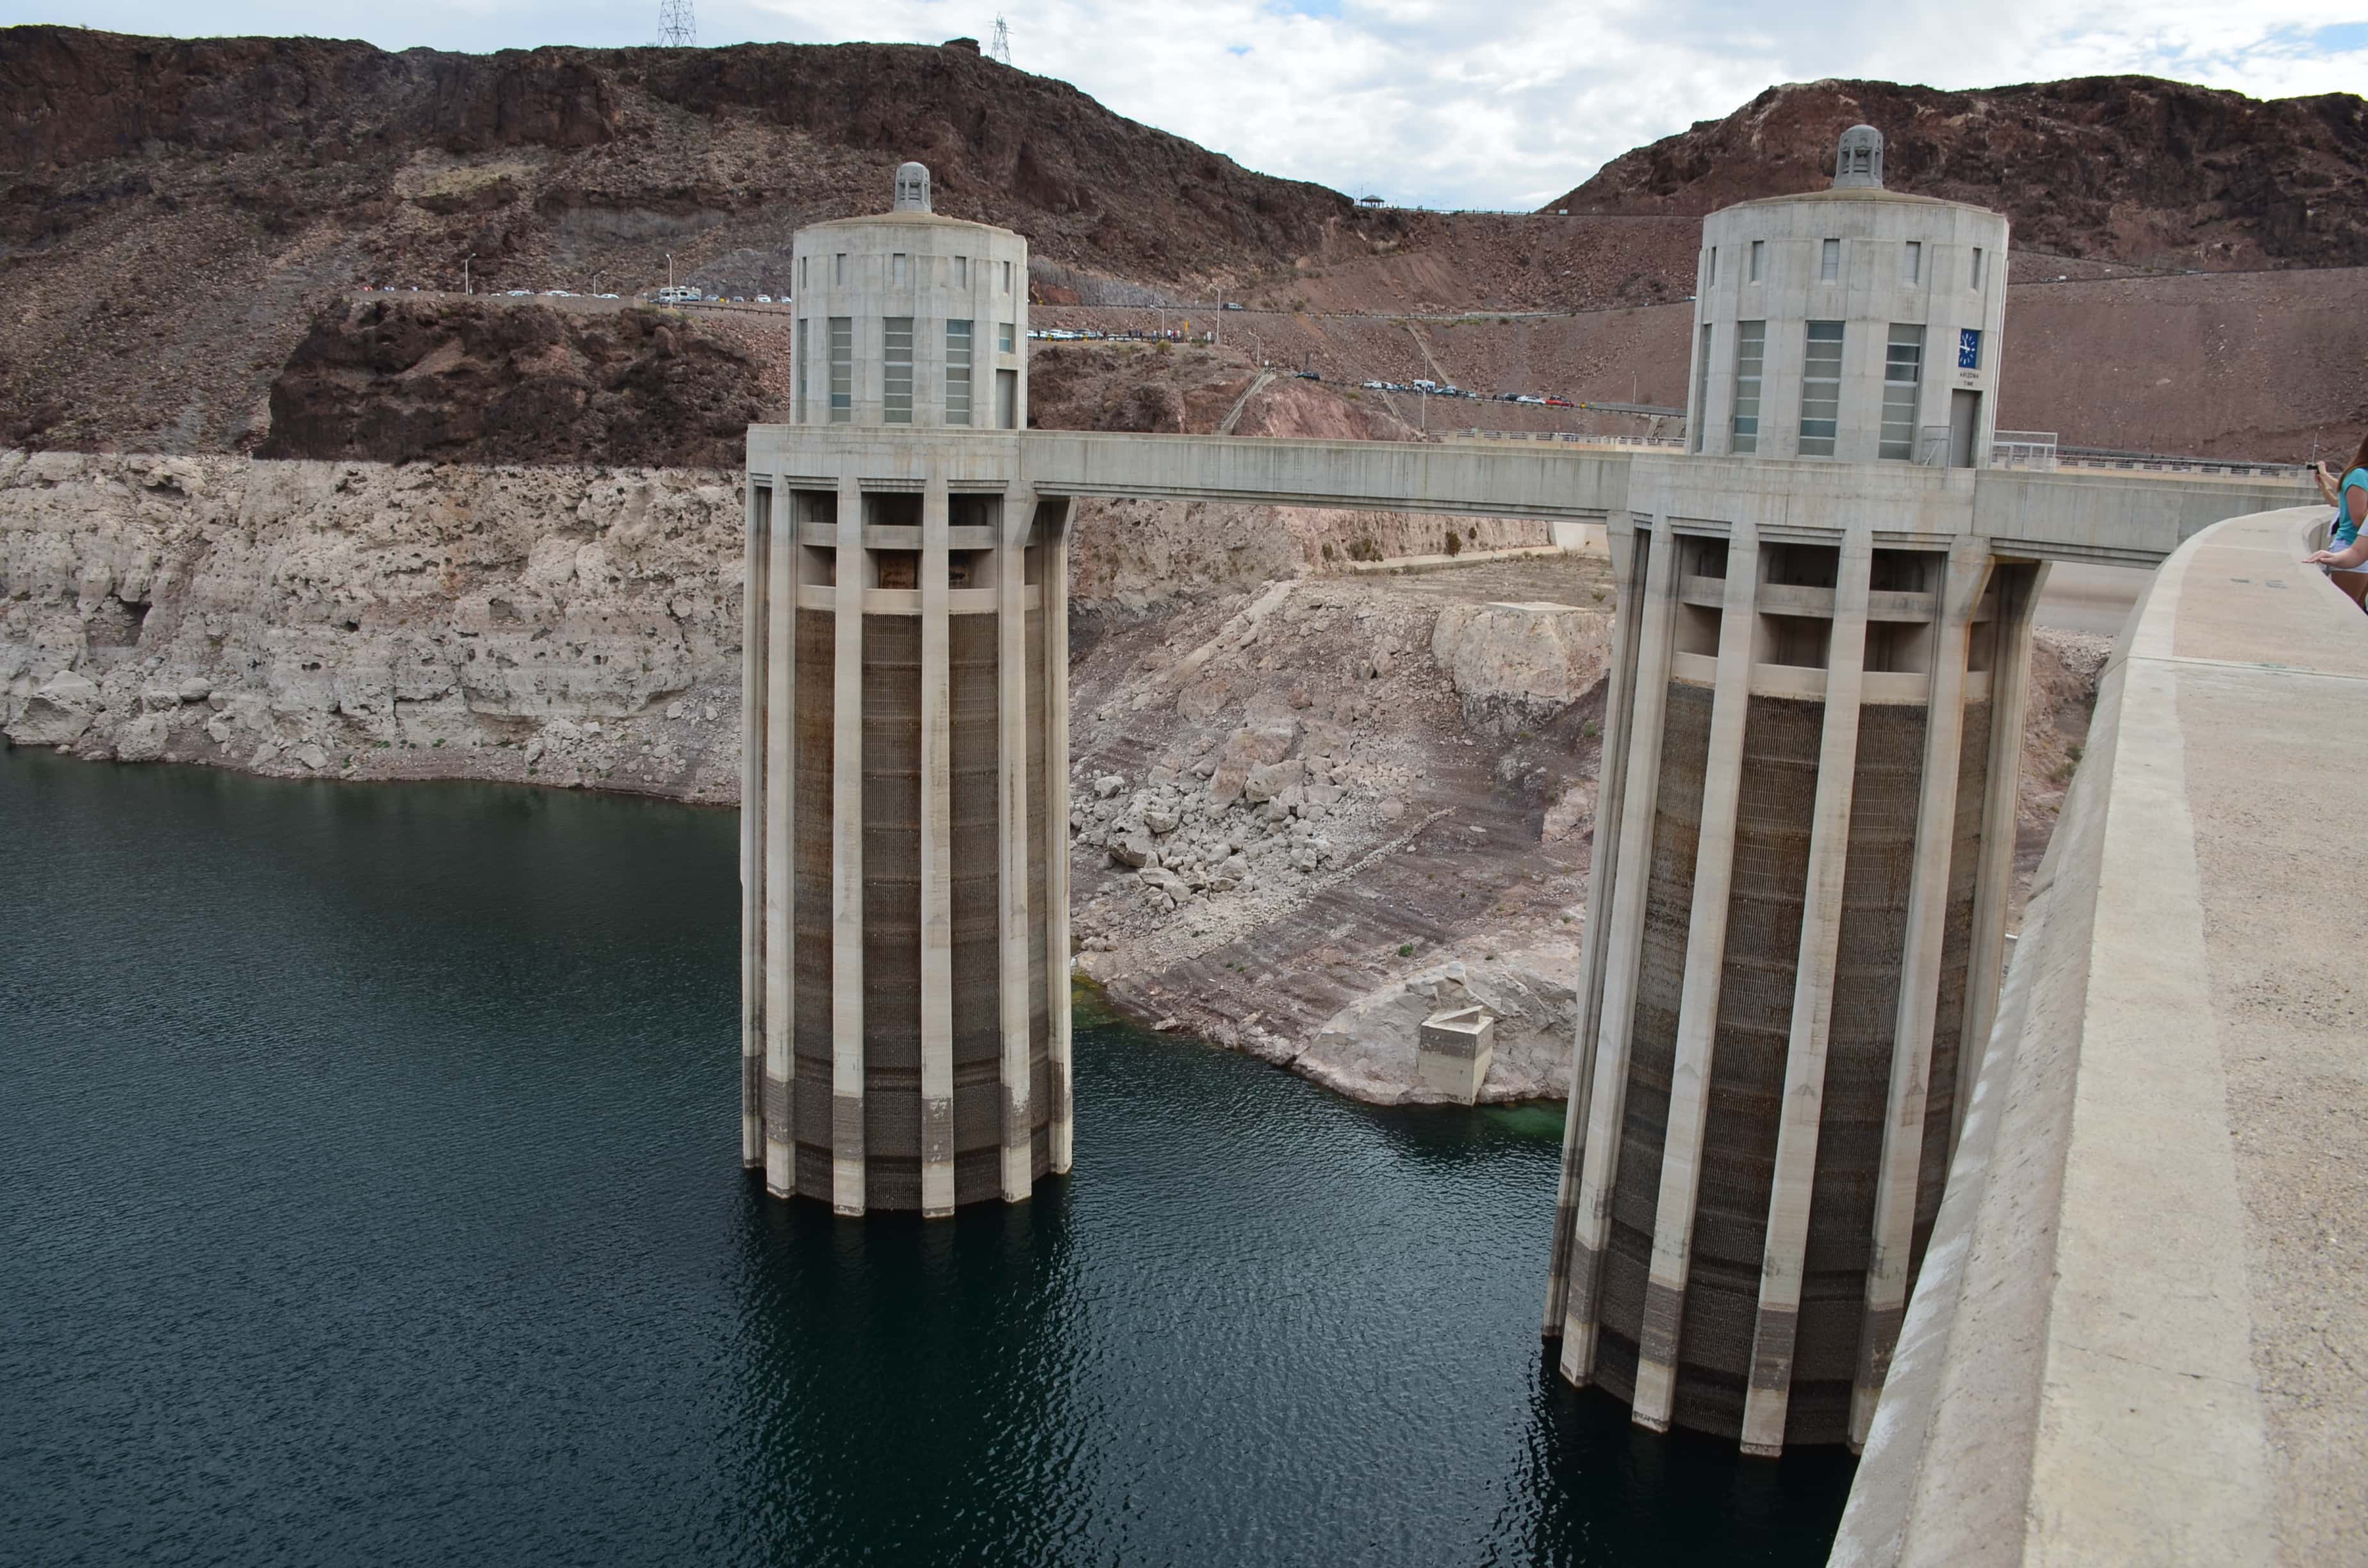 Intake towers at Hoover Dam in Nevada